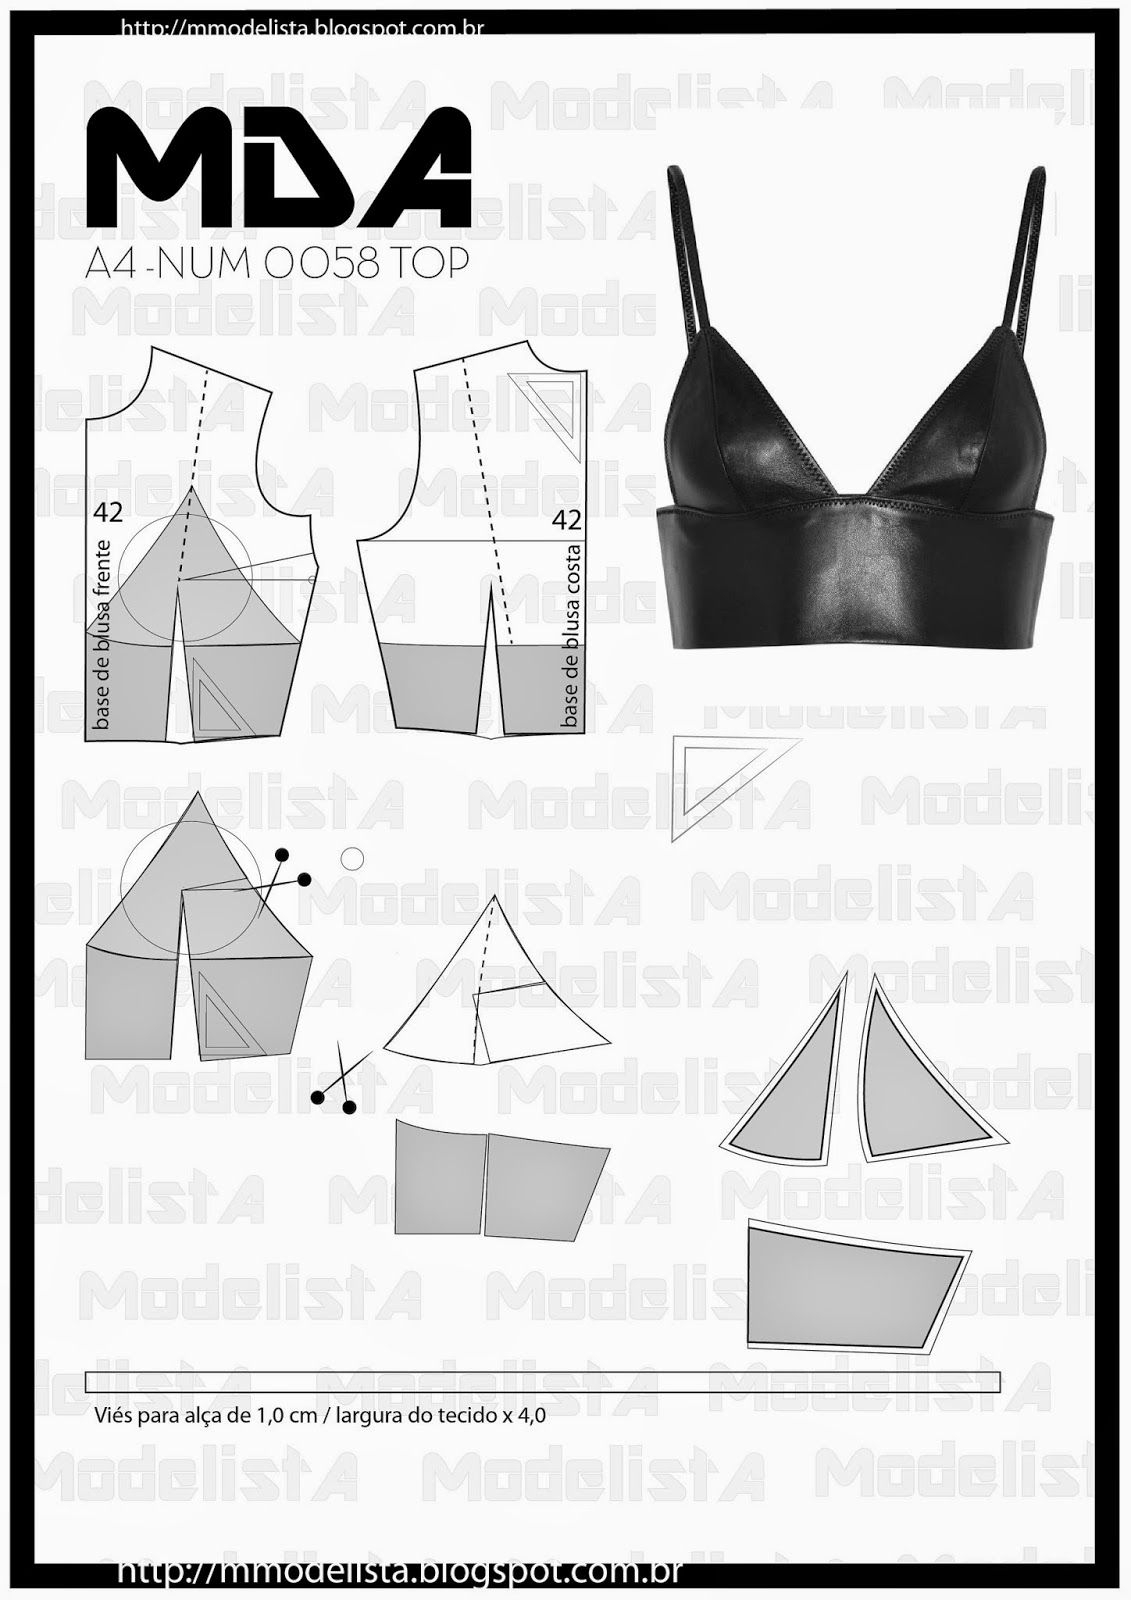 crop-top-sewing-pattern-a4-num-0058-top-learn-sewing-fashion-pinterest